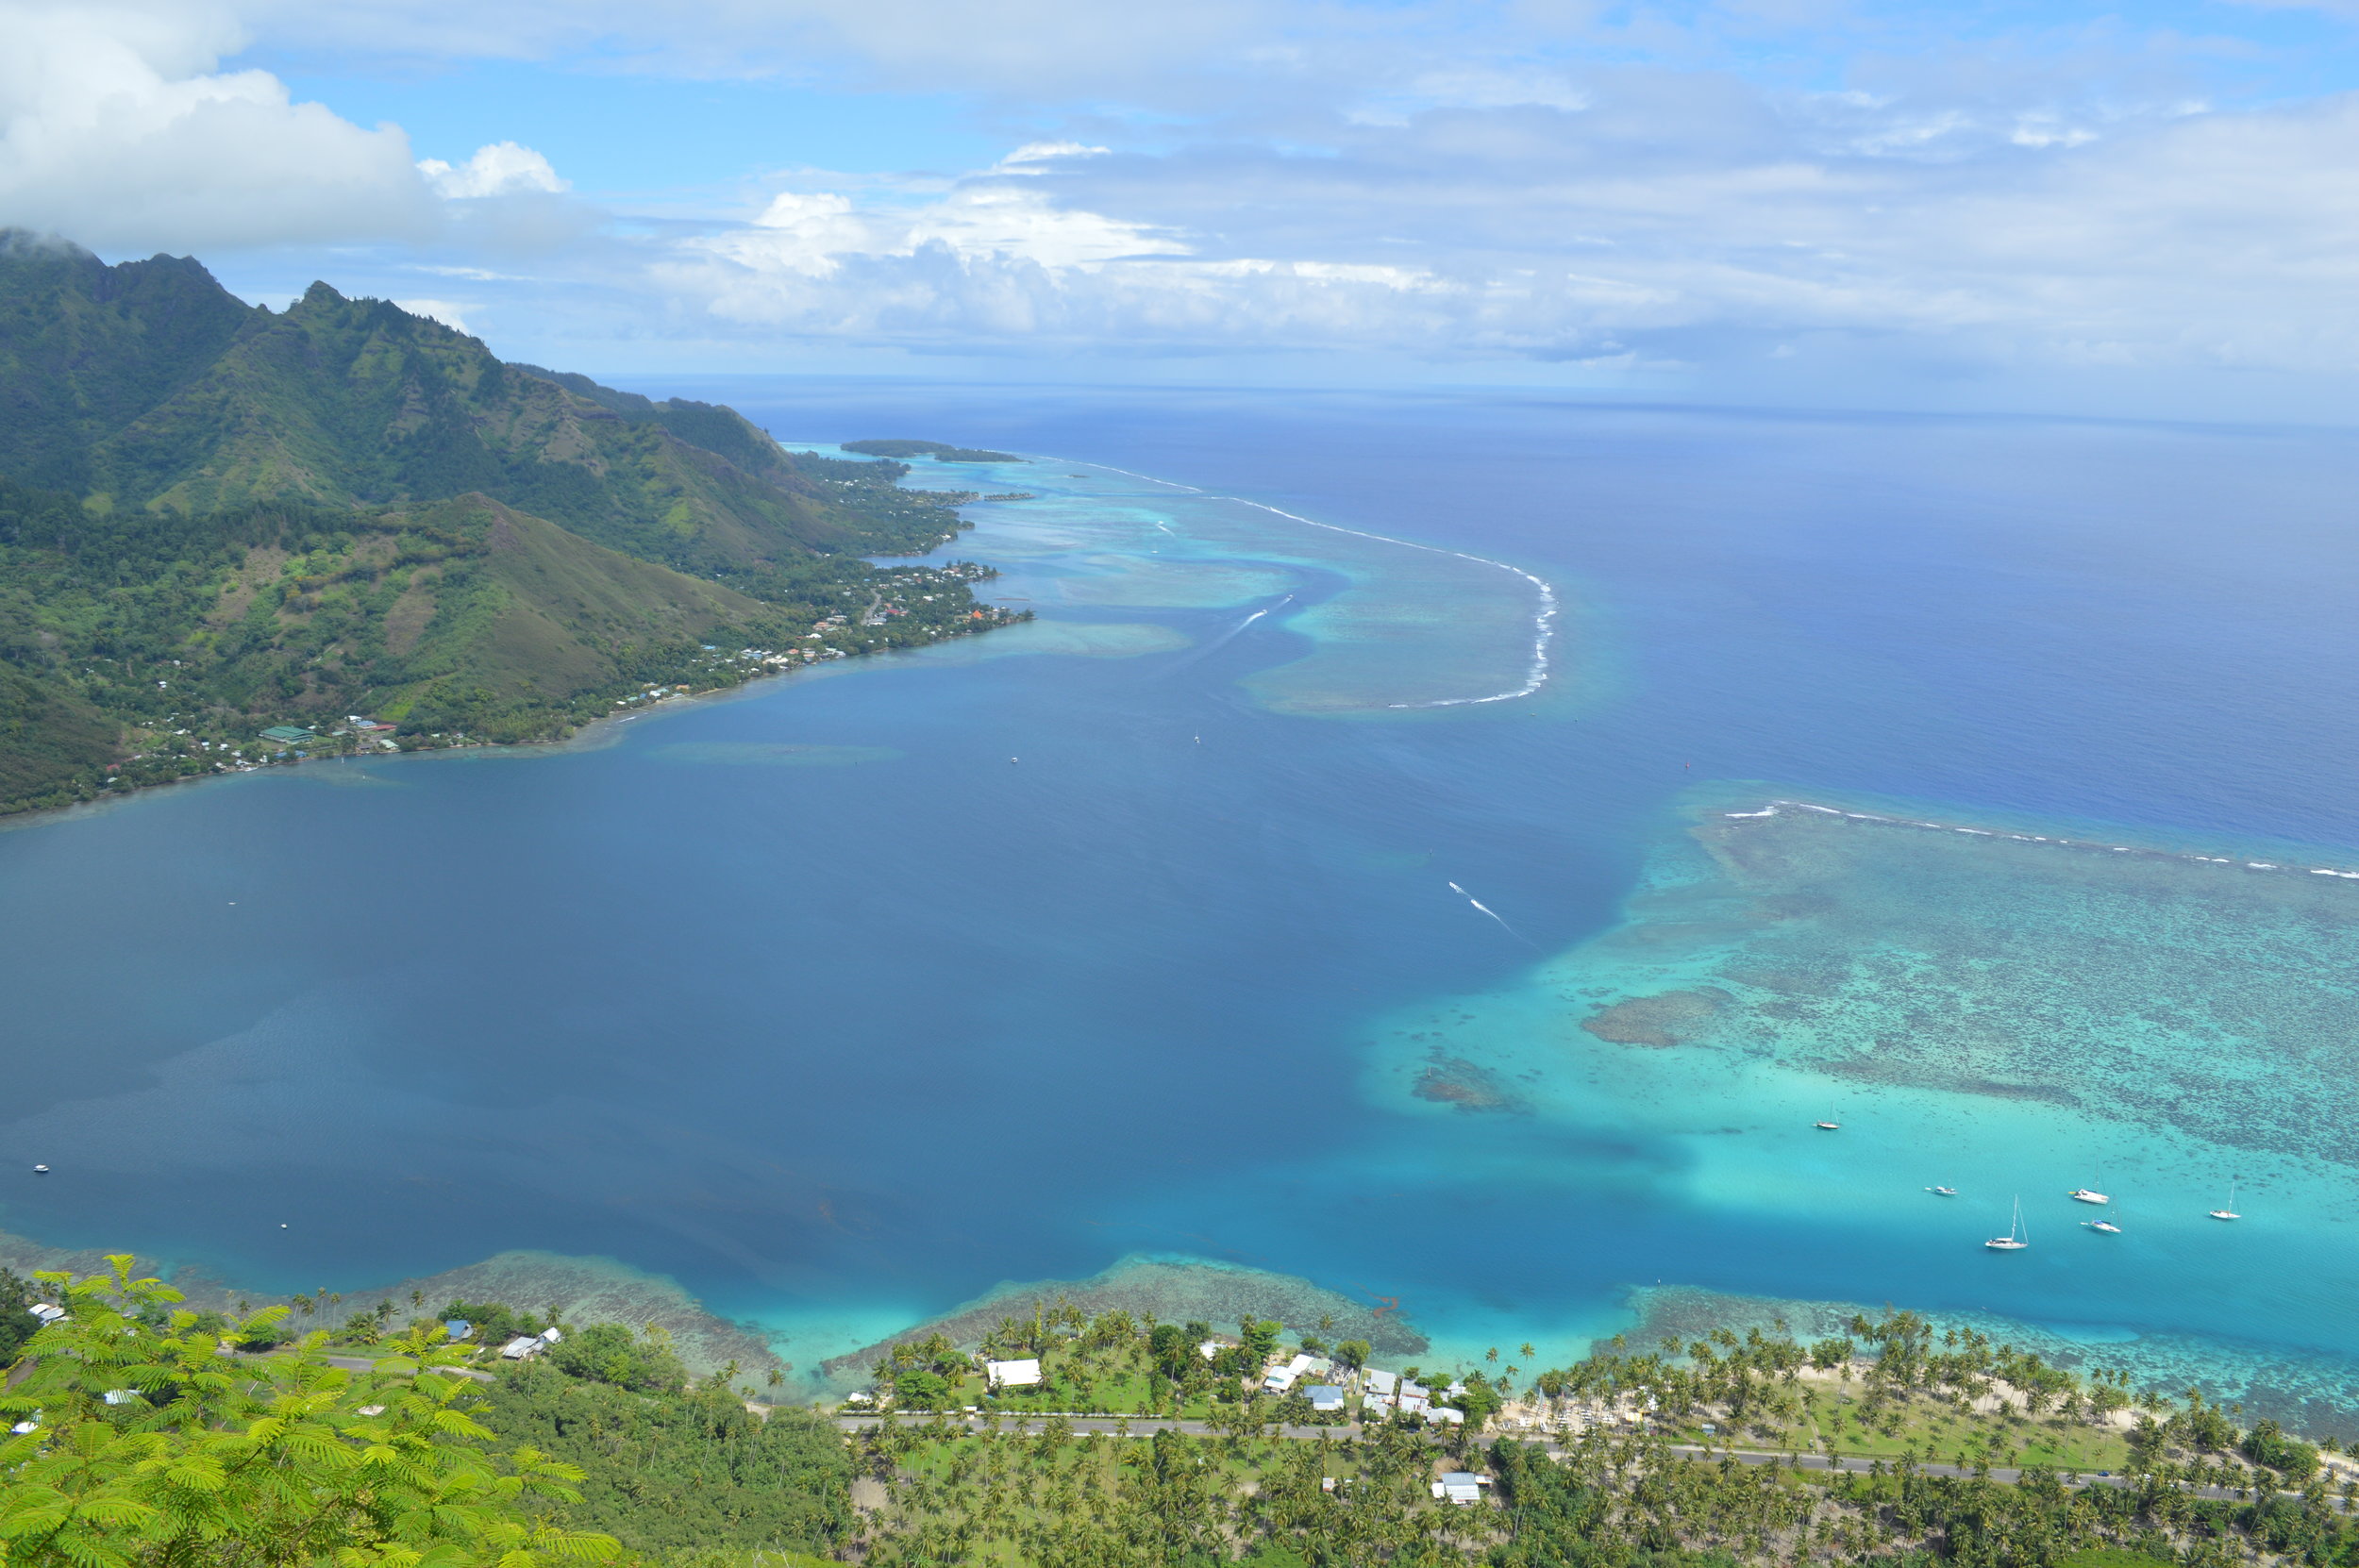 The view from Mt. Rotui in Moorea